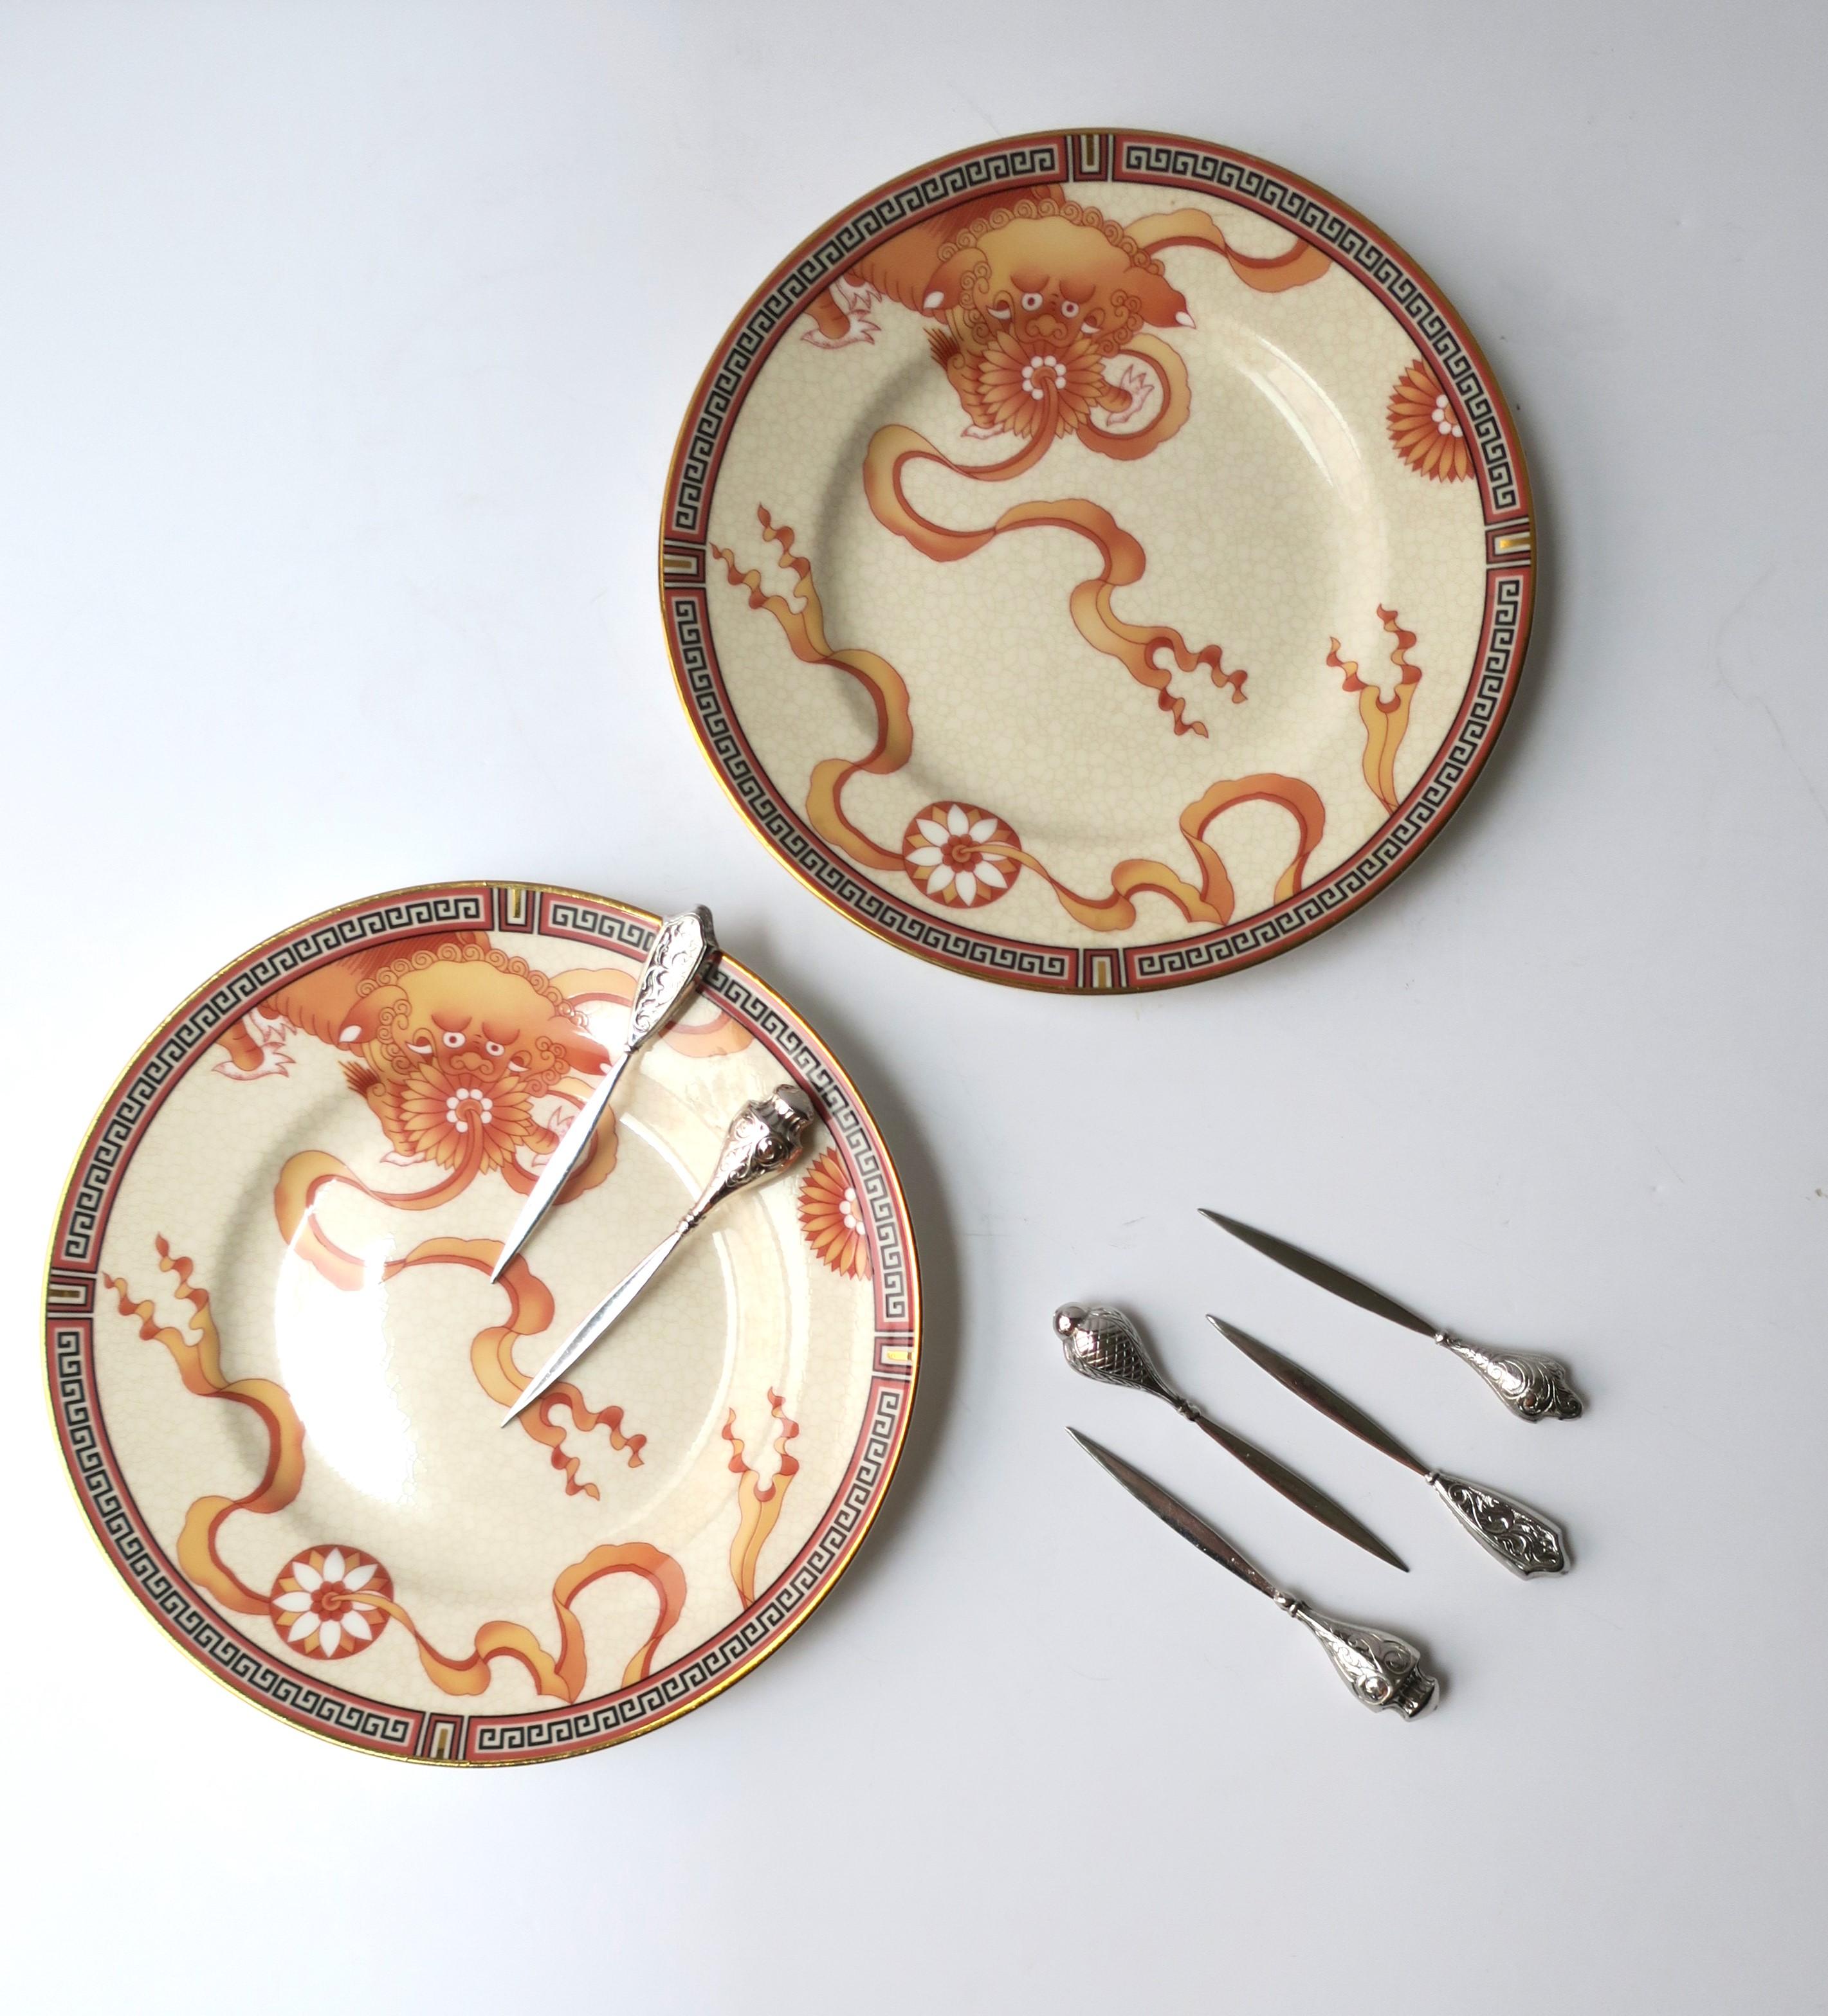 20th Century Wedgwood Dynasty Porcelain Plates, Set of 2 For Sale